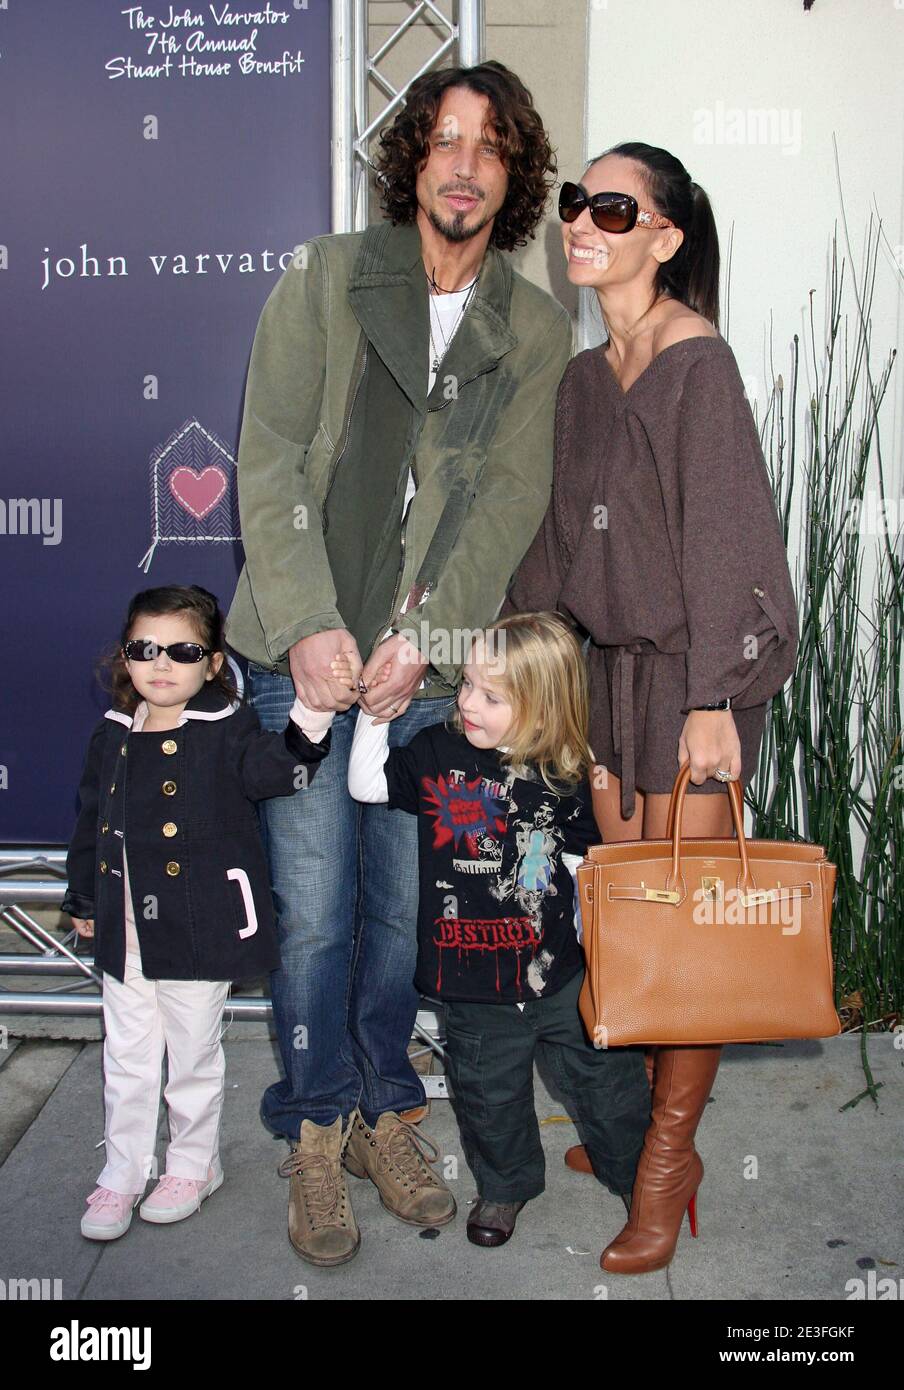 Chris Cornell arrives at Bring Your Heart To Our House: The John Varvatos  And Converse 7th Annual Stuart House Benefit, John Varvatos Botique, West  Hollywood, California. March 8, 2009. (Pictured: Chris Cornell).